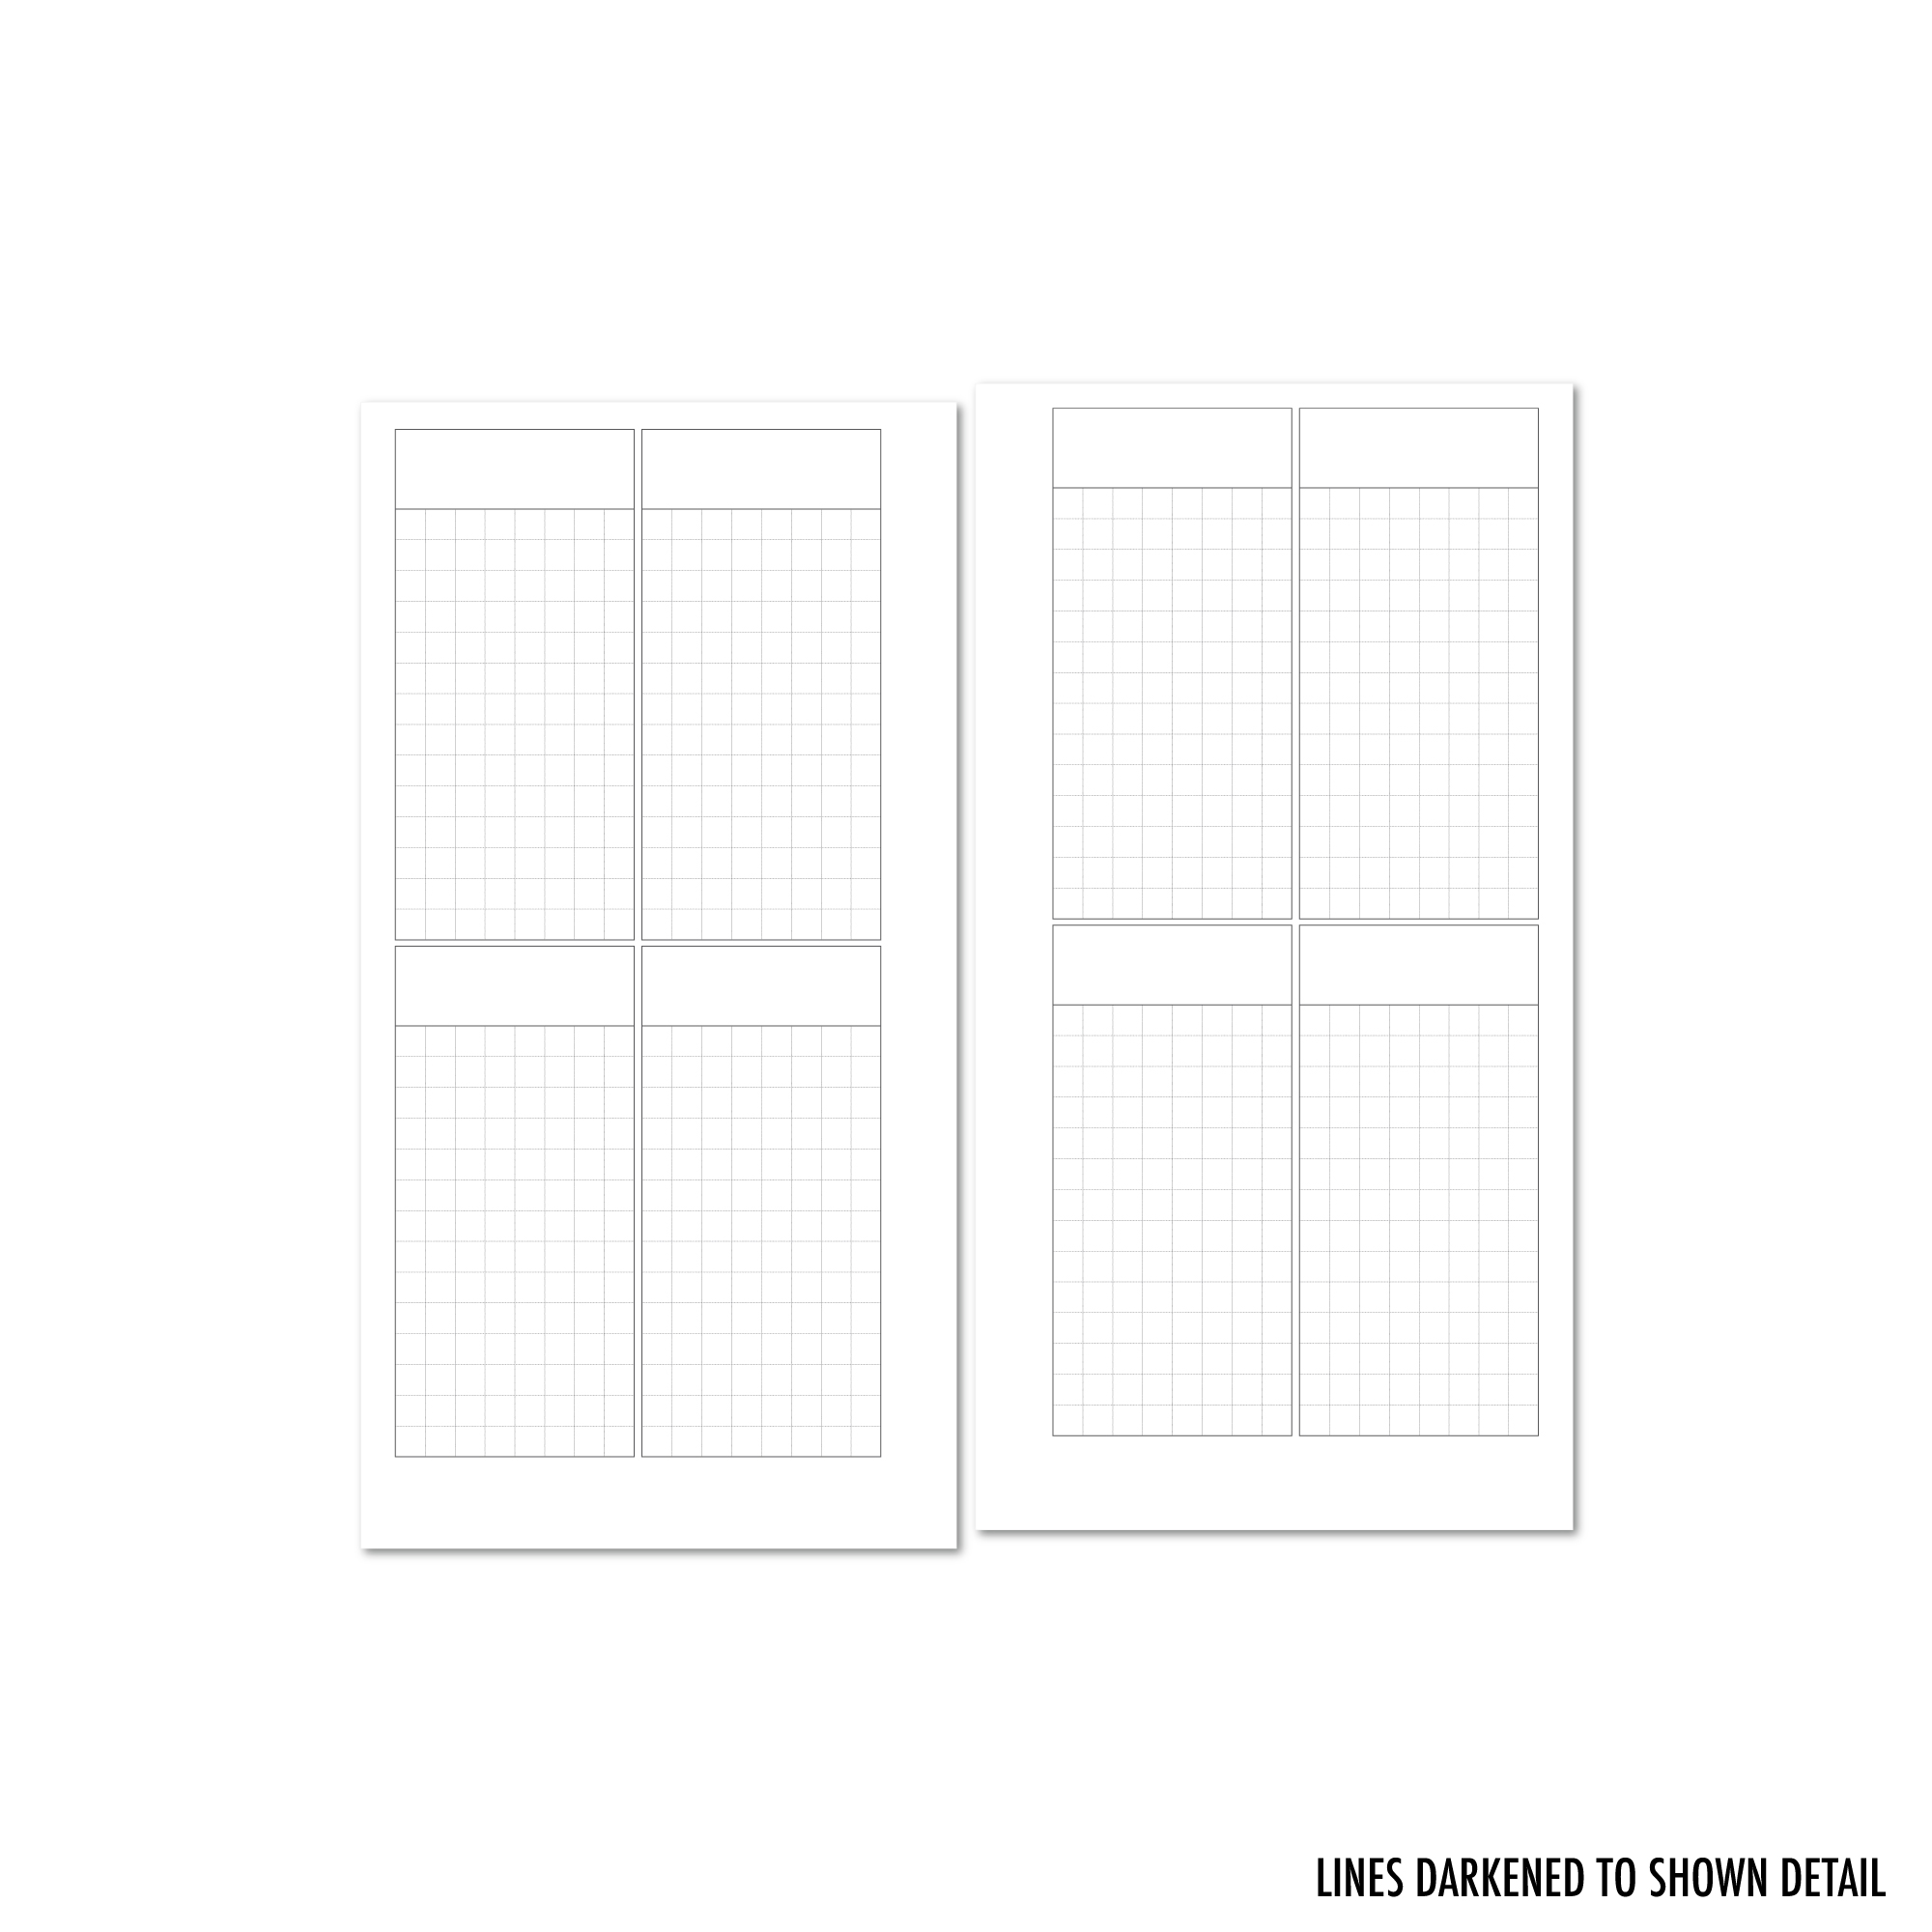 Week on 2 Pages Vertical header with Grid Calendar Refill